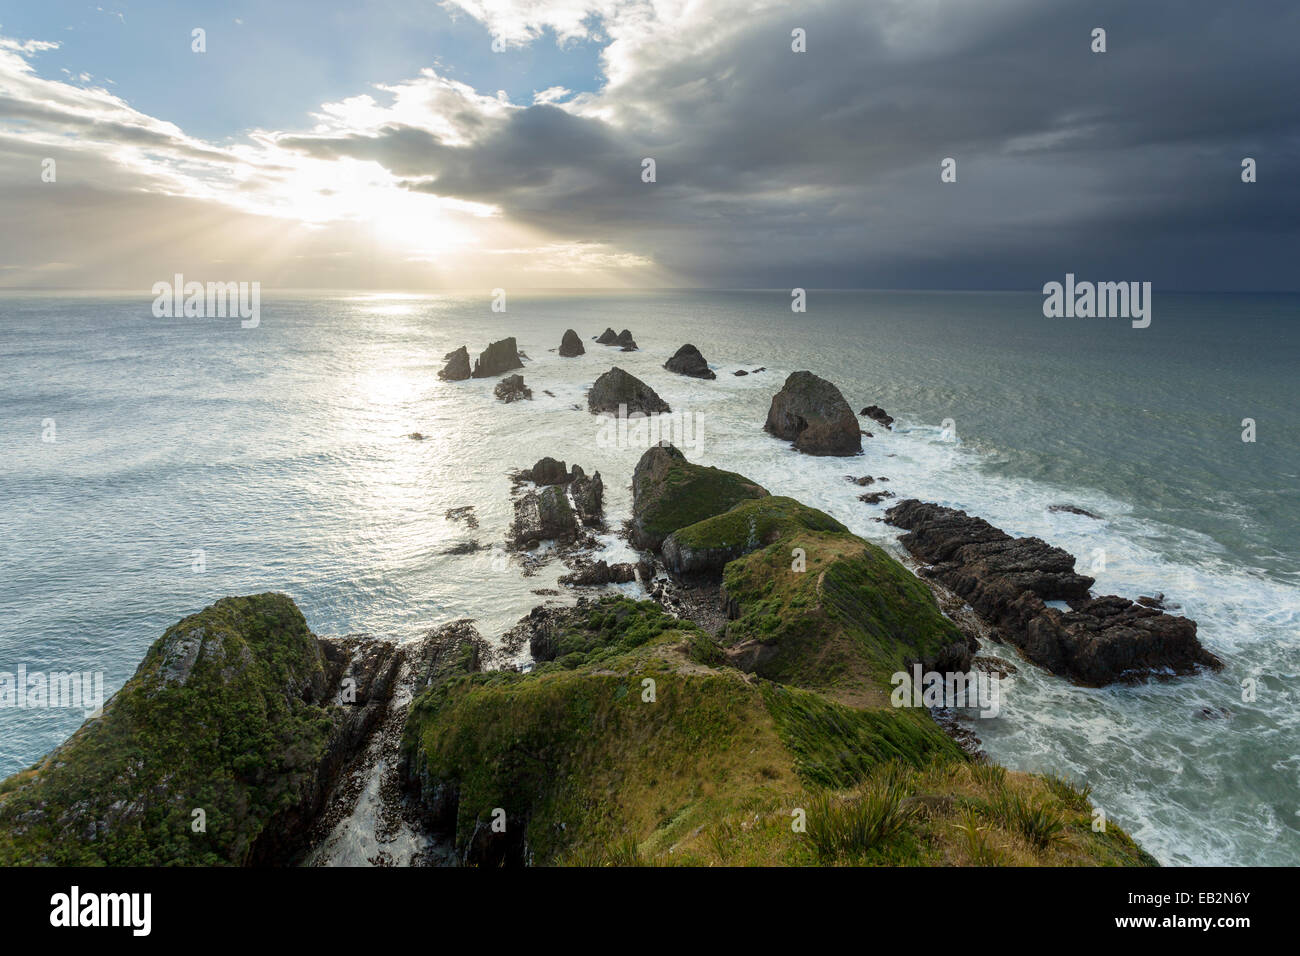 Cliffs rising from the Pacific with a rising sun, at Nugget Point, Nugget Point, Ahuriri Flat, Otago Region, New Zealand Stock Photo